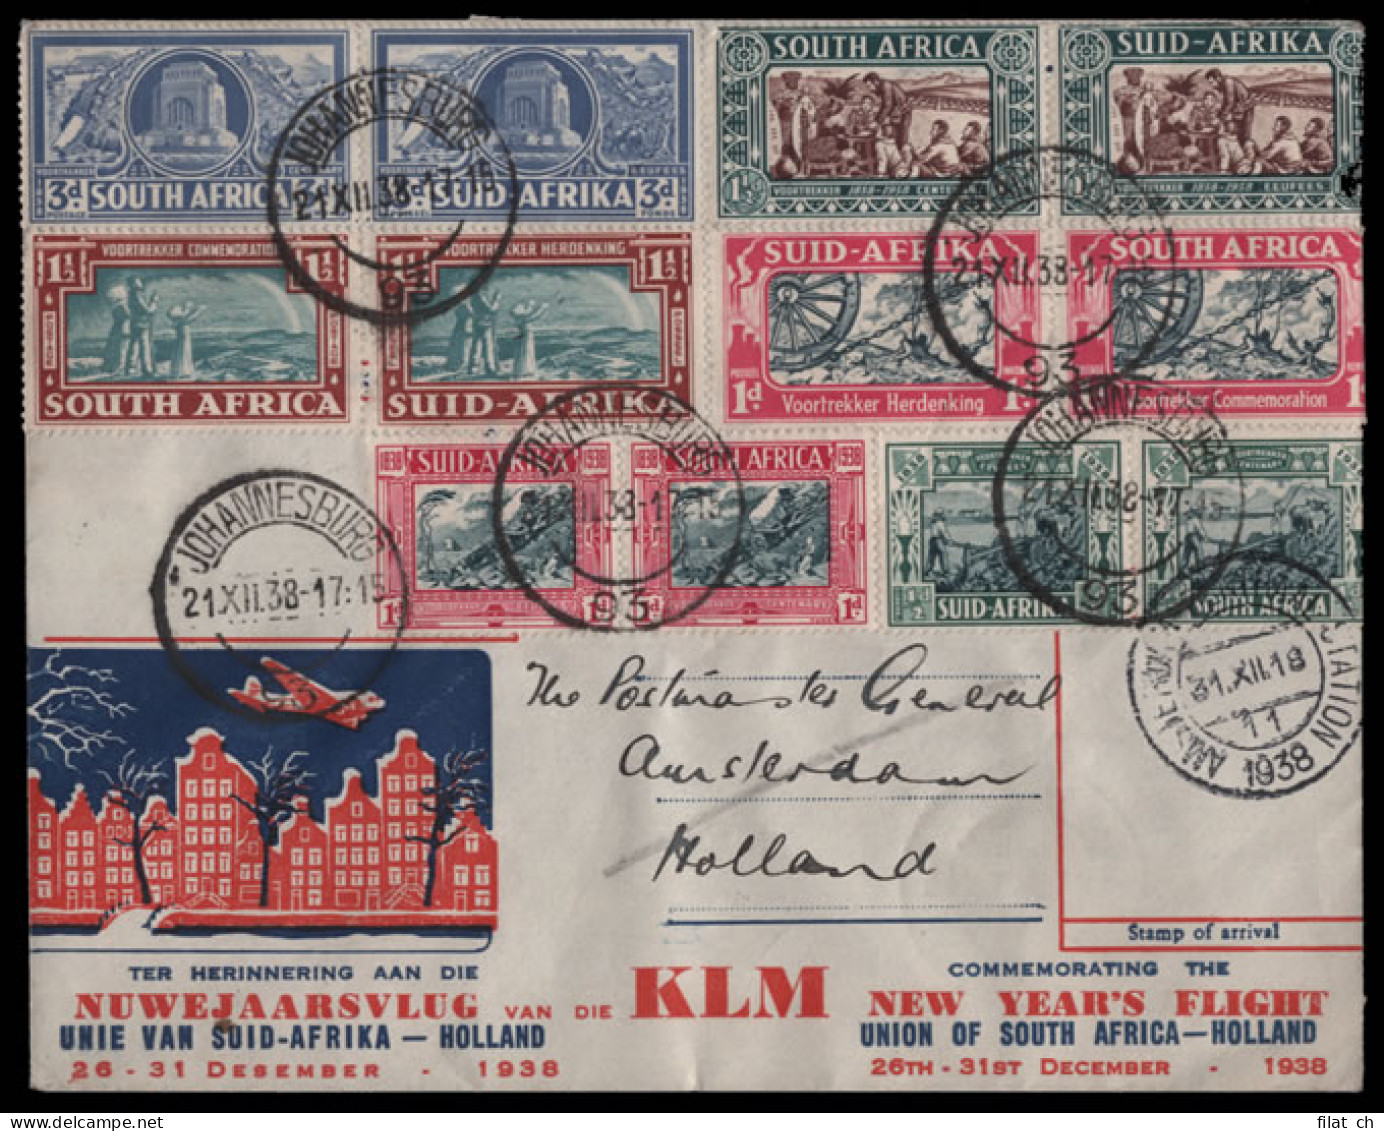 South Africa 1938 KLM New Years Day Voortrekker Monument Flight - Airmail